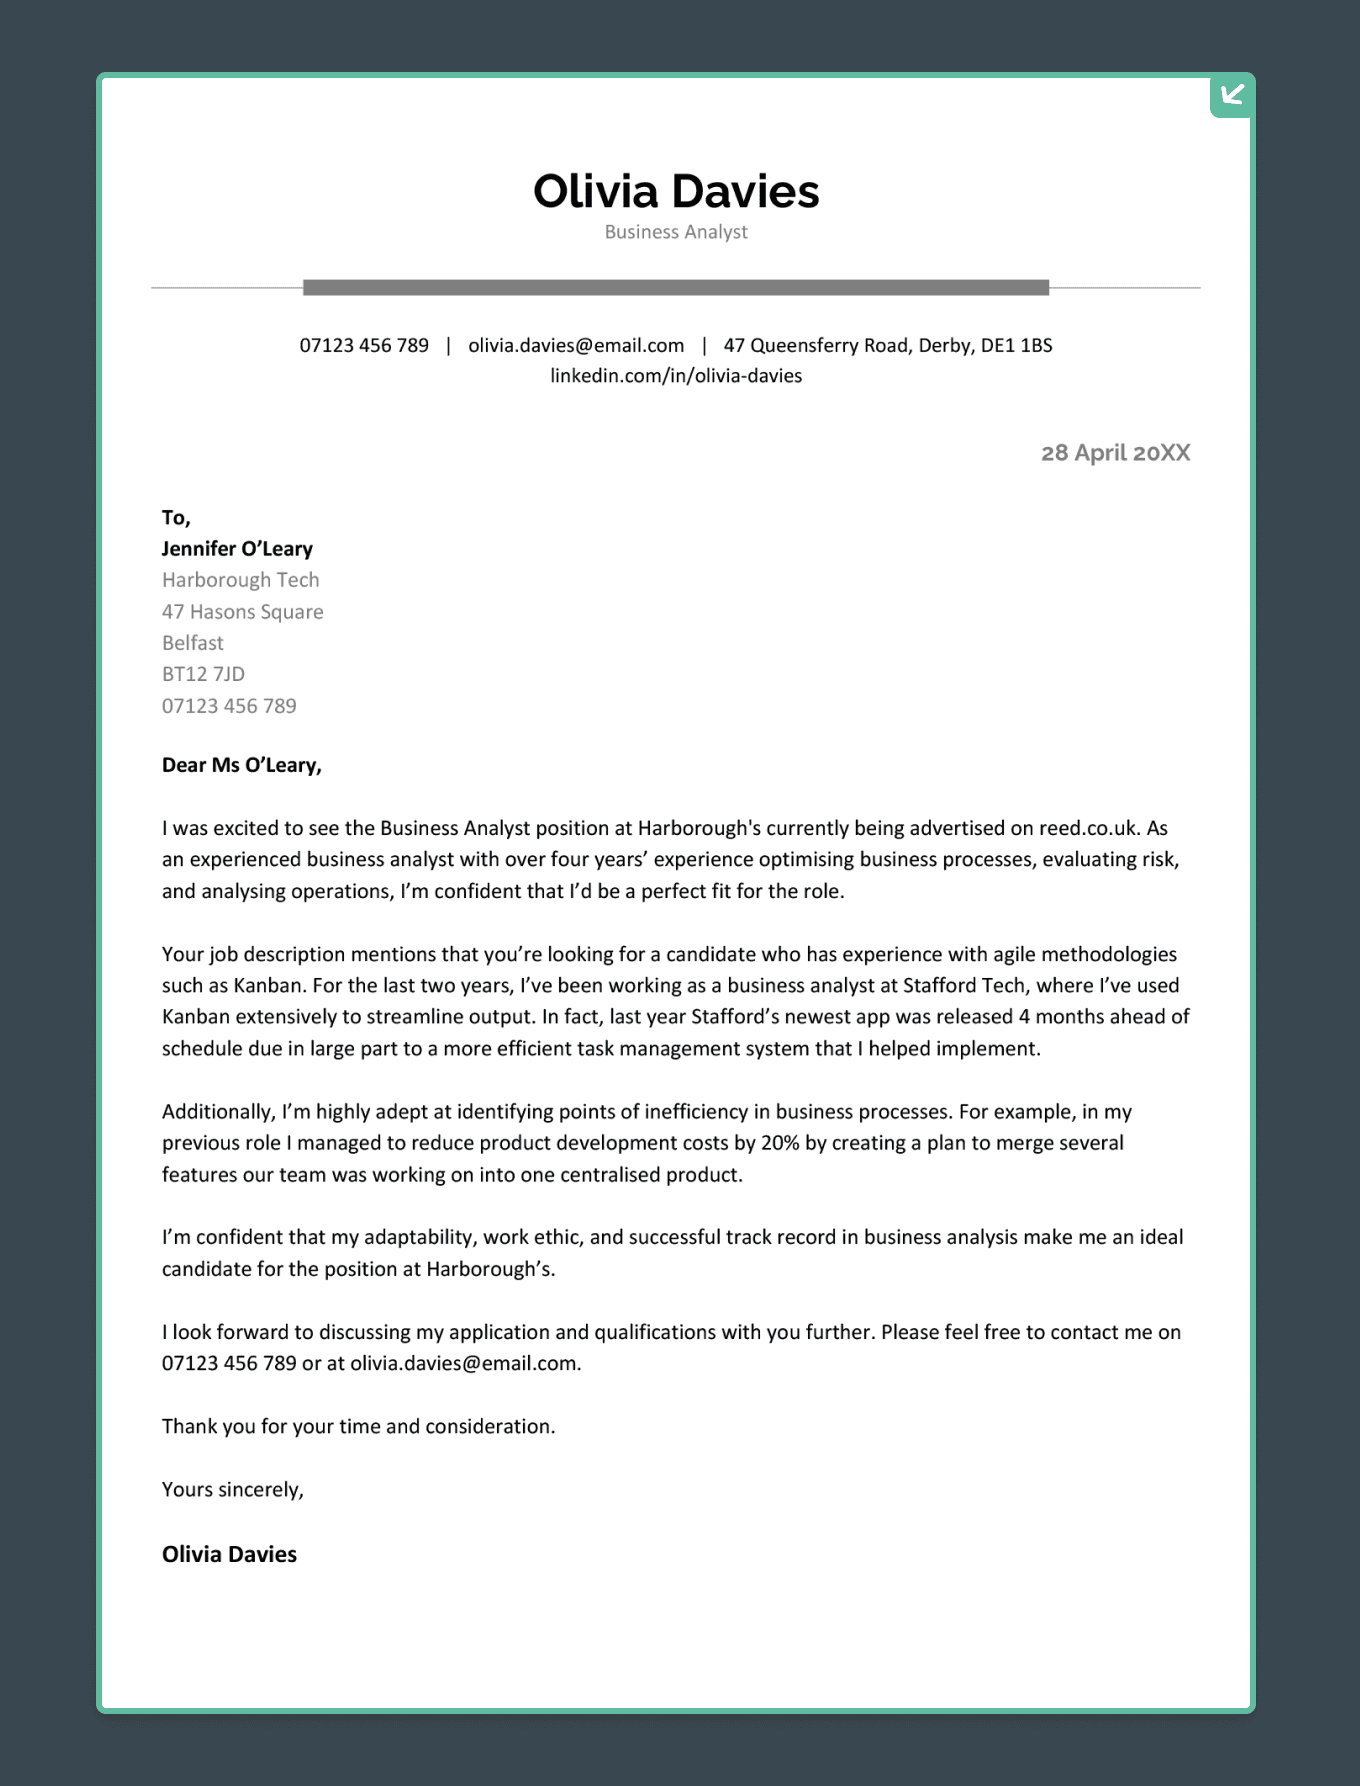 A cover letter with a green border.